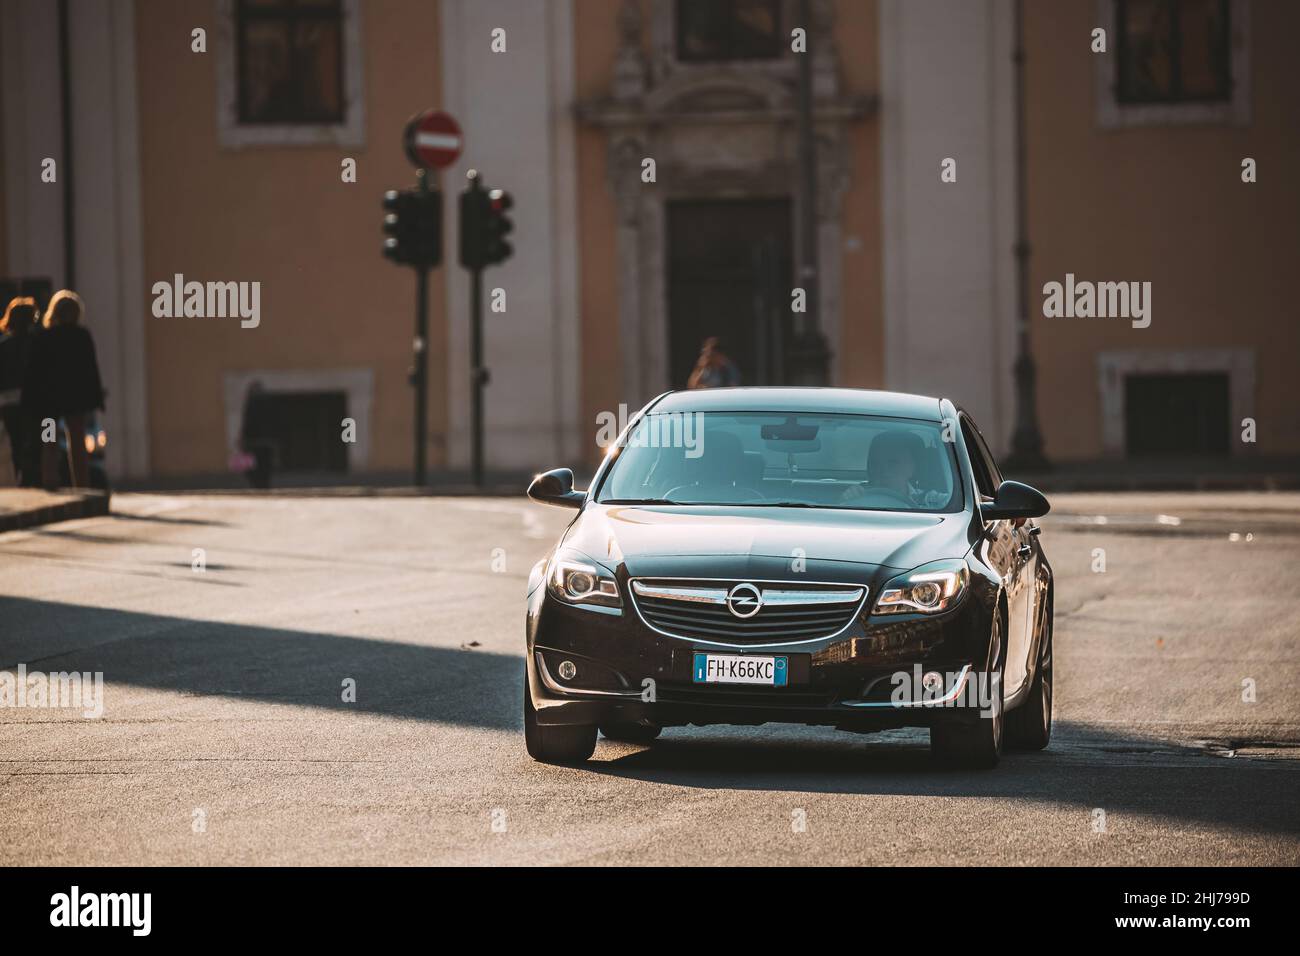 Black Color Opel Insignia With Face-lift In First Generation Moving At Street. Stock Photo